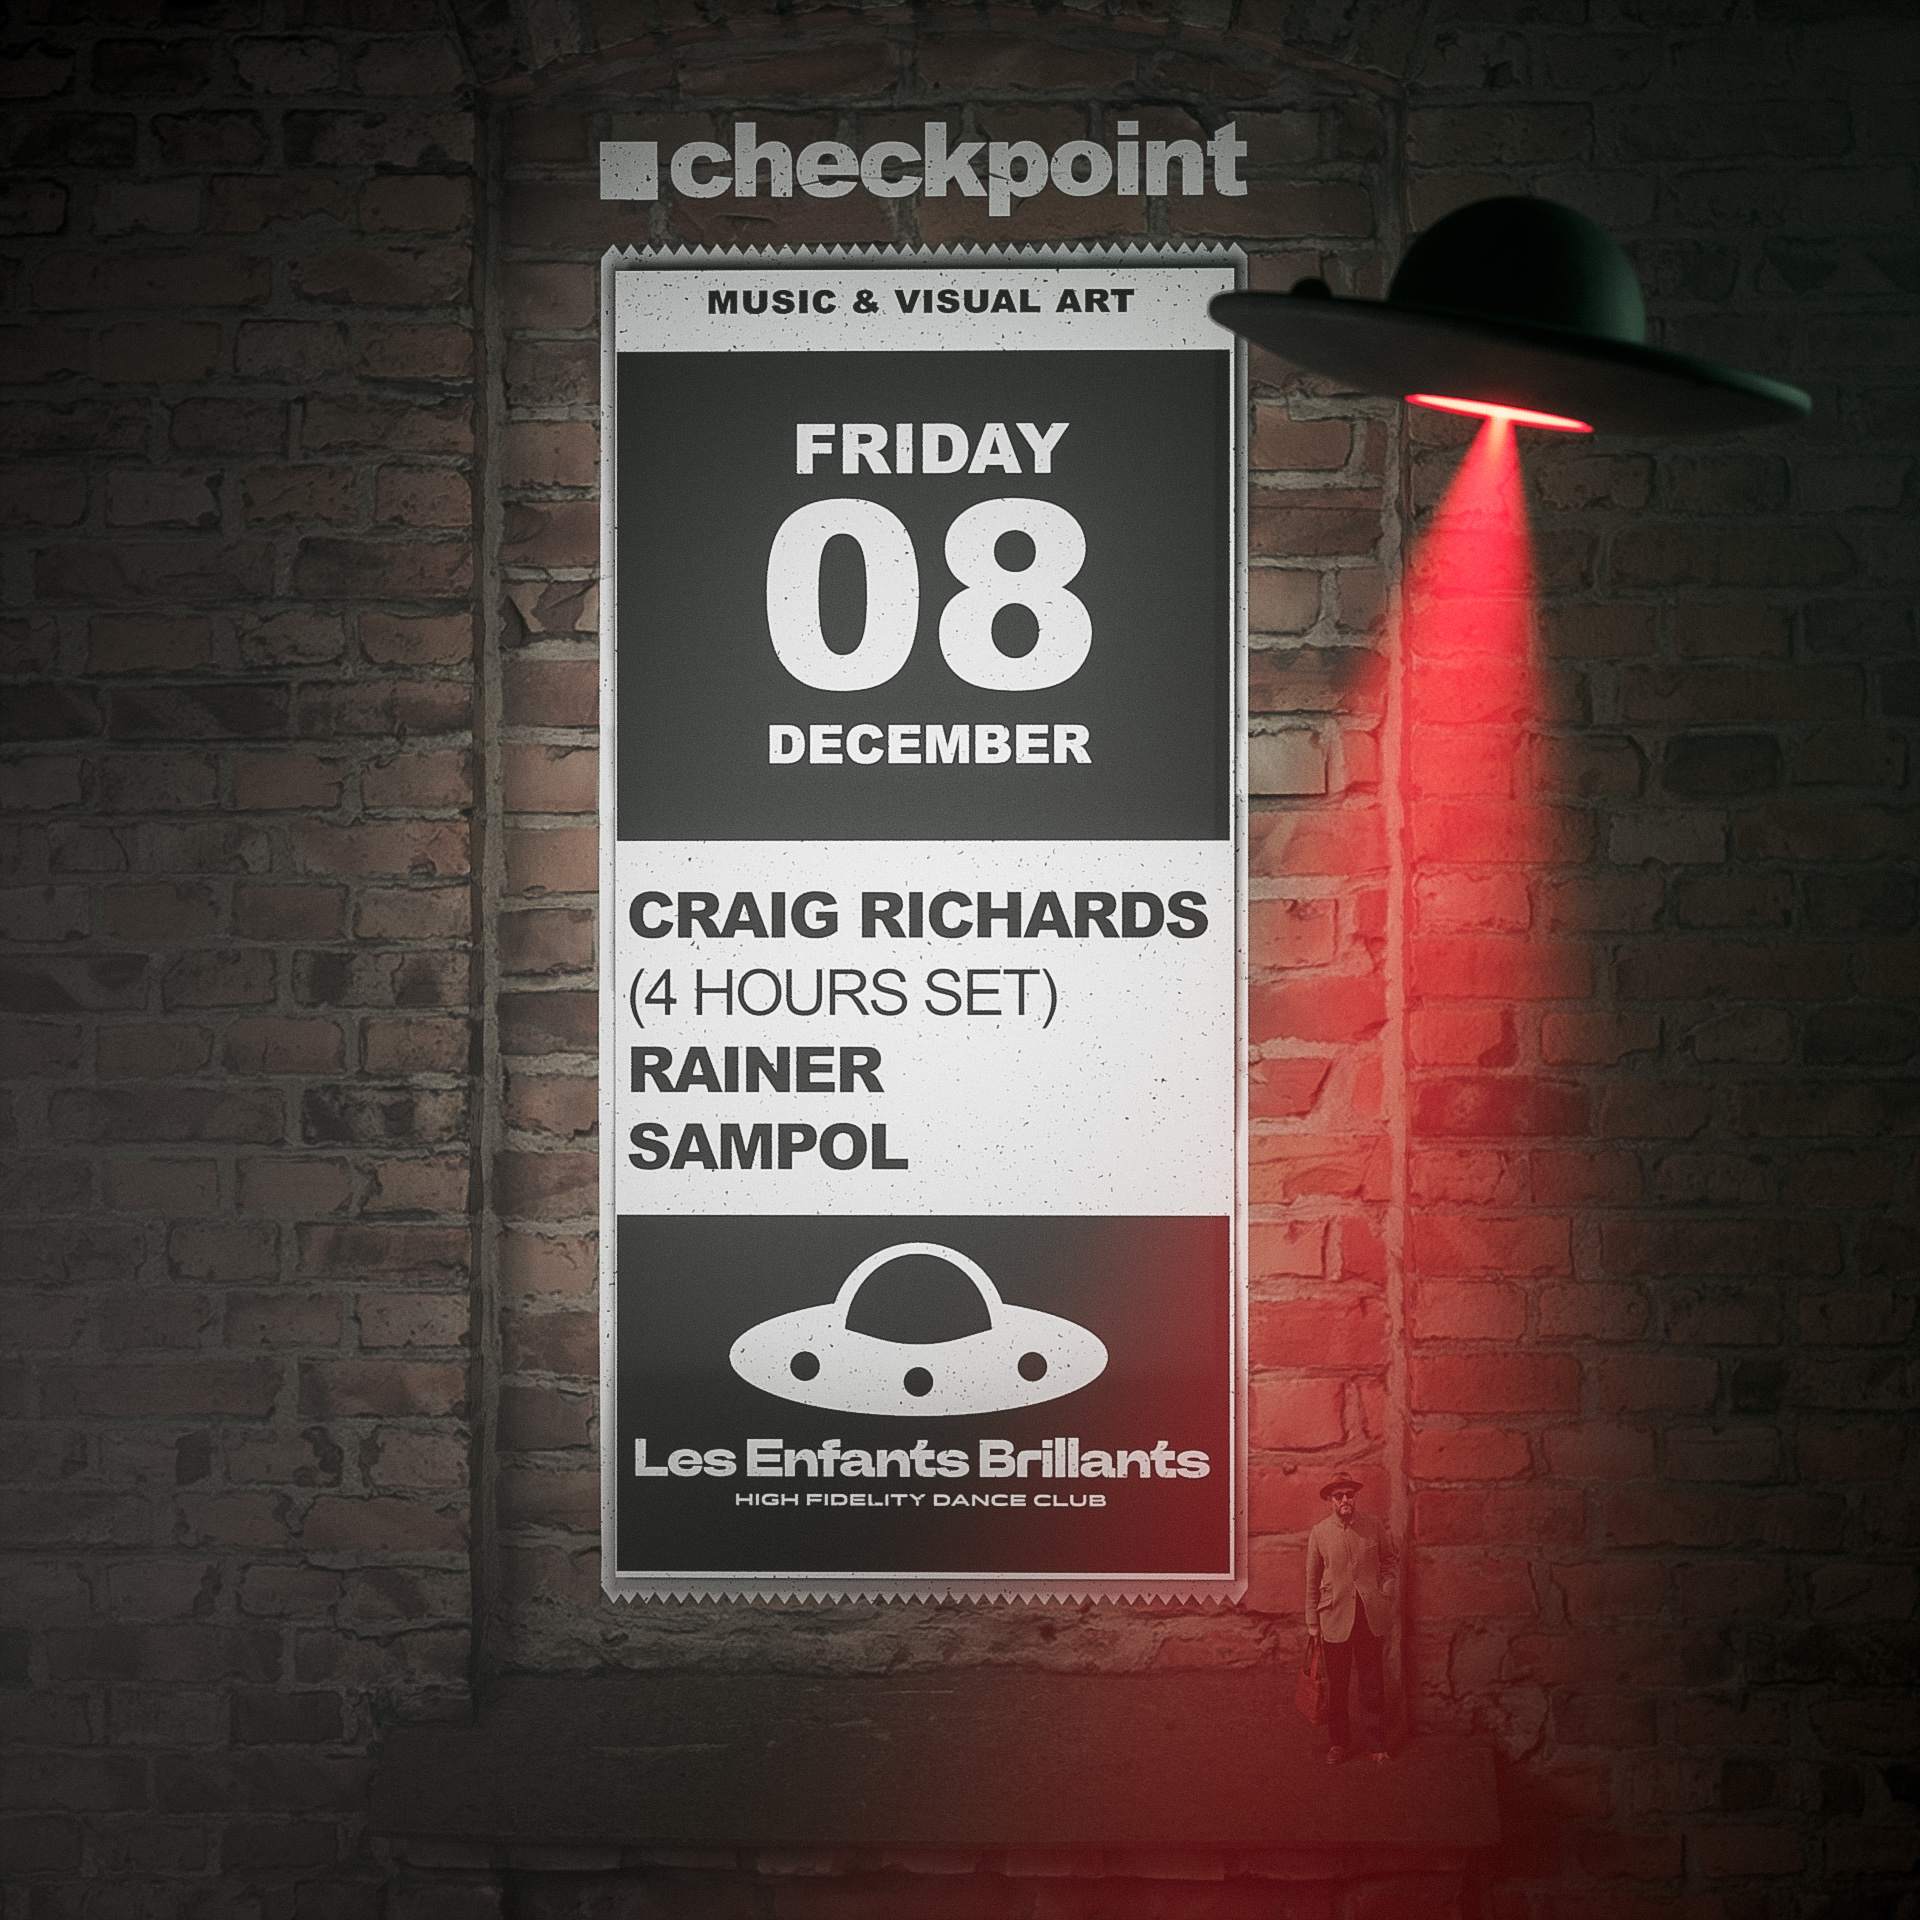 ■ Checkpoint December Edition with Craig Richards (4h set) - Página frontal